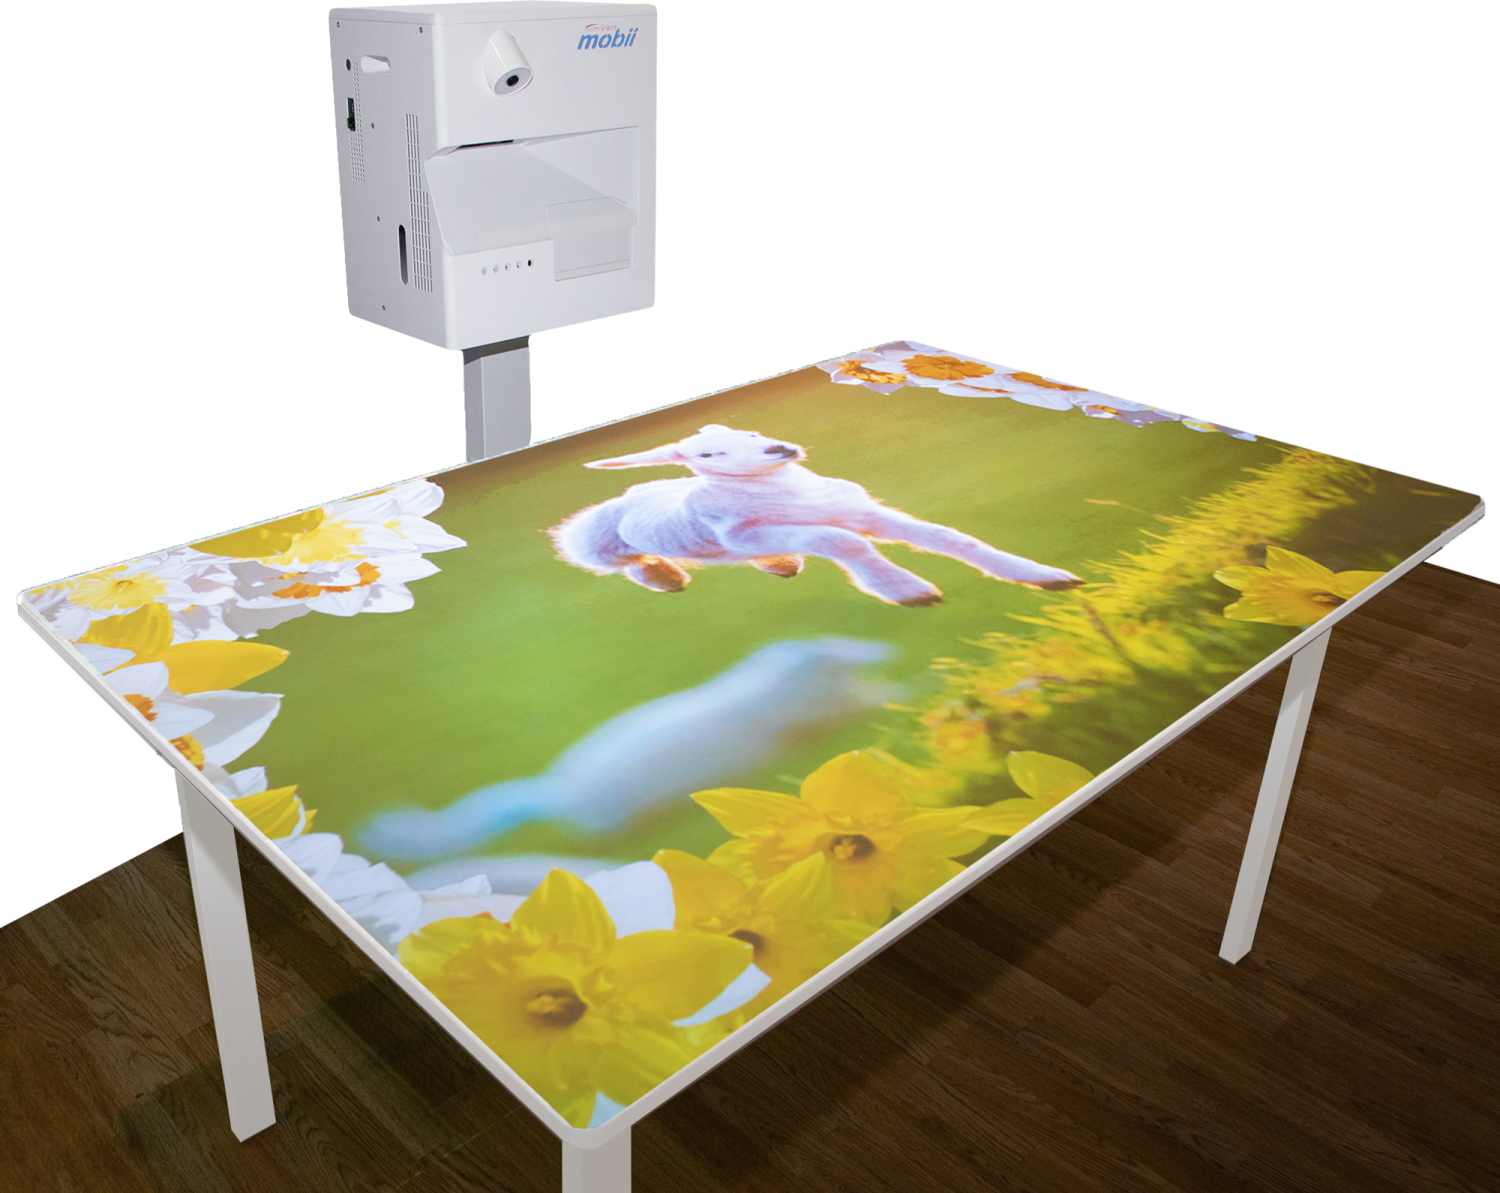 Mobii interactive sensory table projector projecting an image onto a tabletop